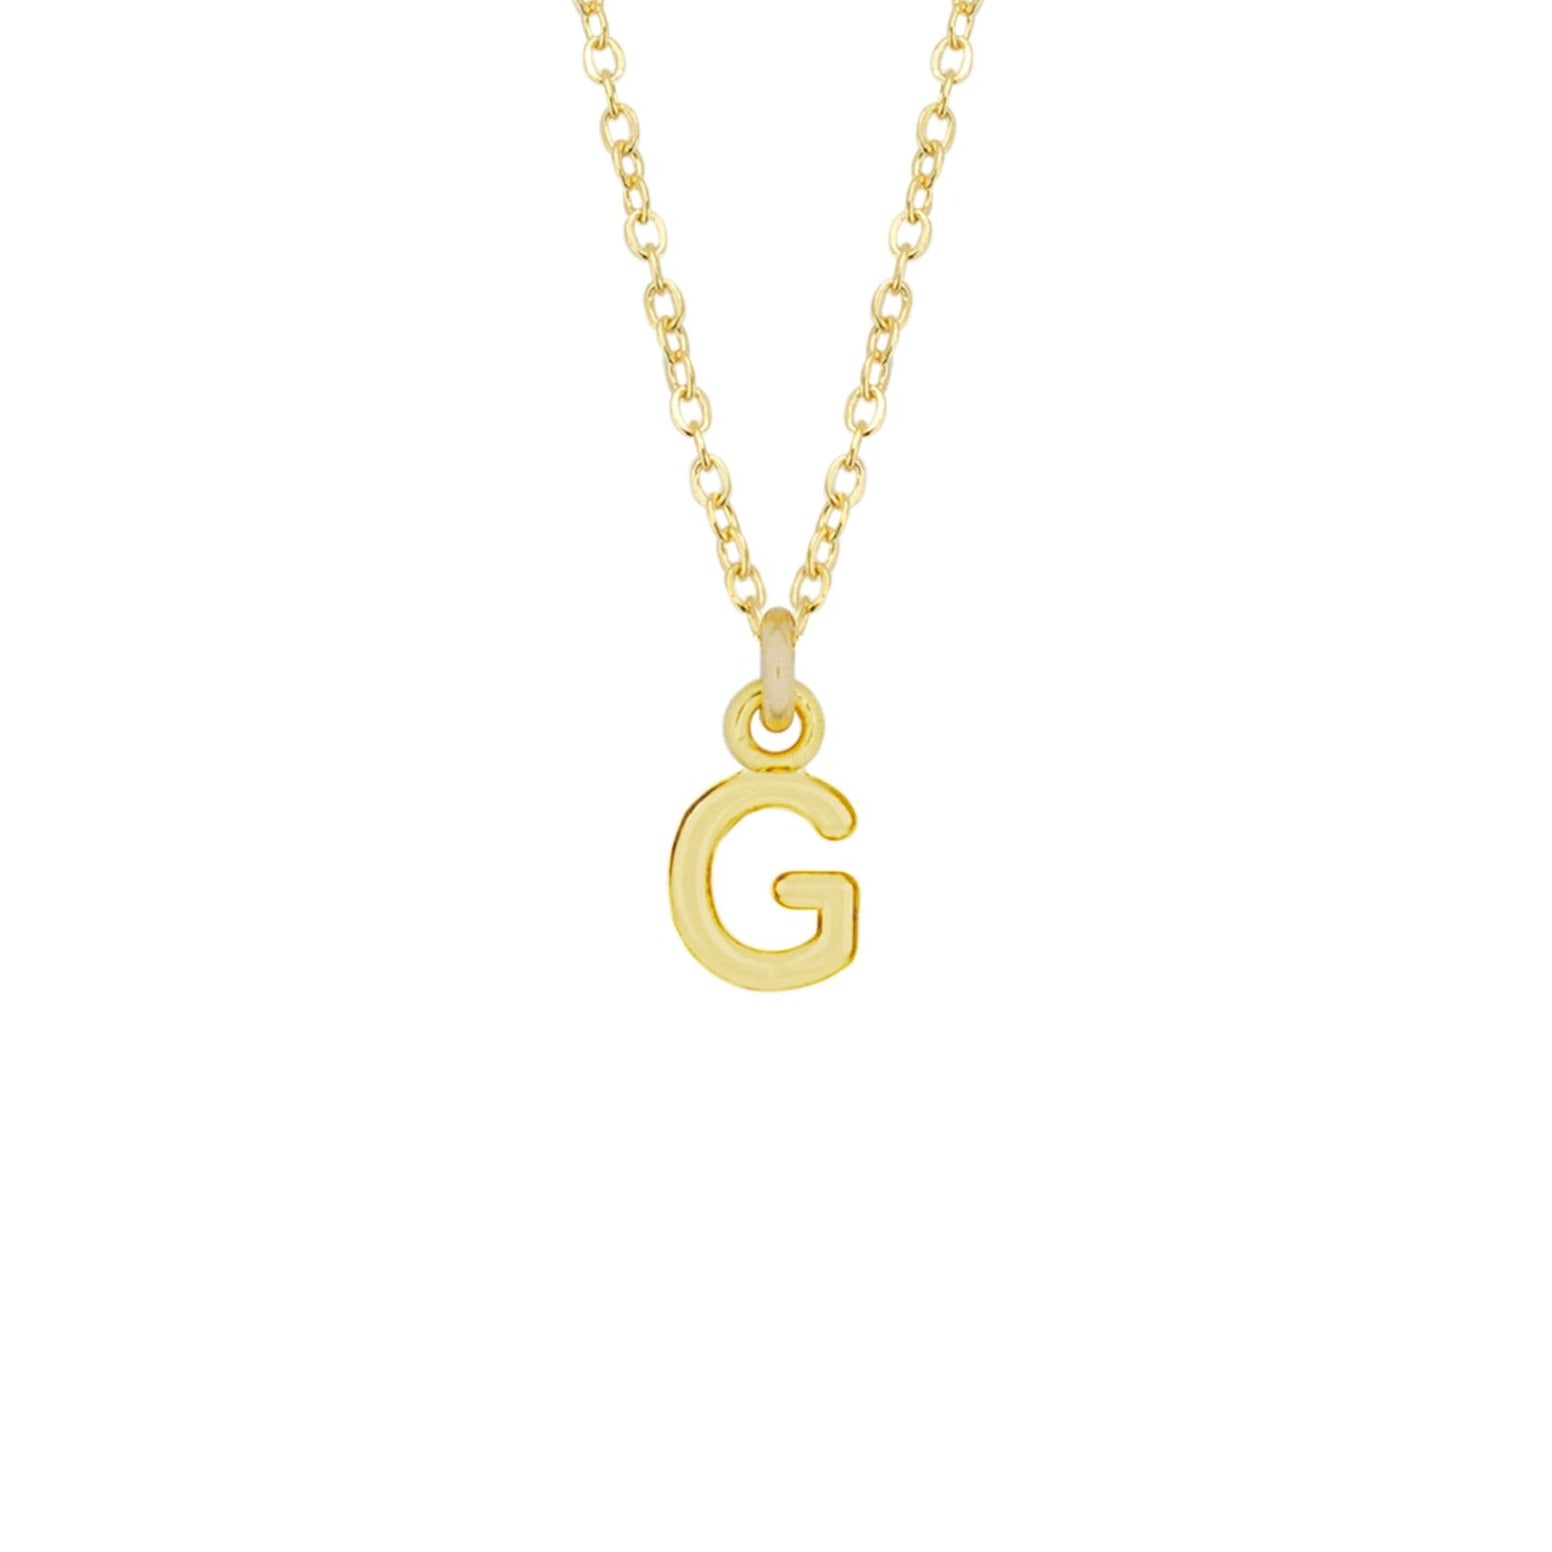 Big Initial G Necklace in 18k Gold Plating over 925 Sterling Silver |  JOYAMO - Personalized Jewelry